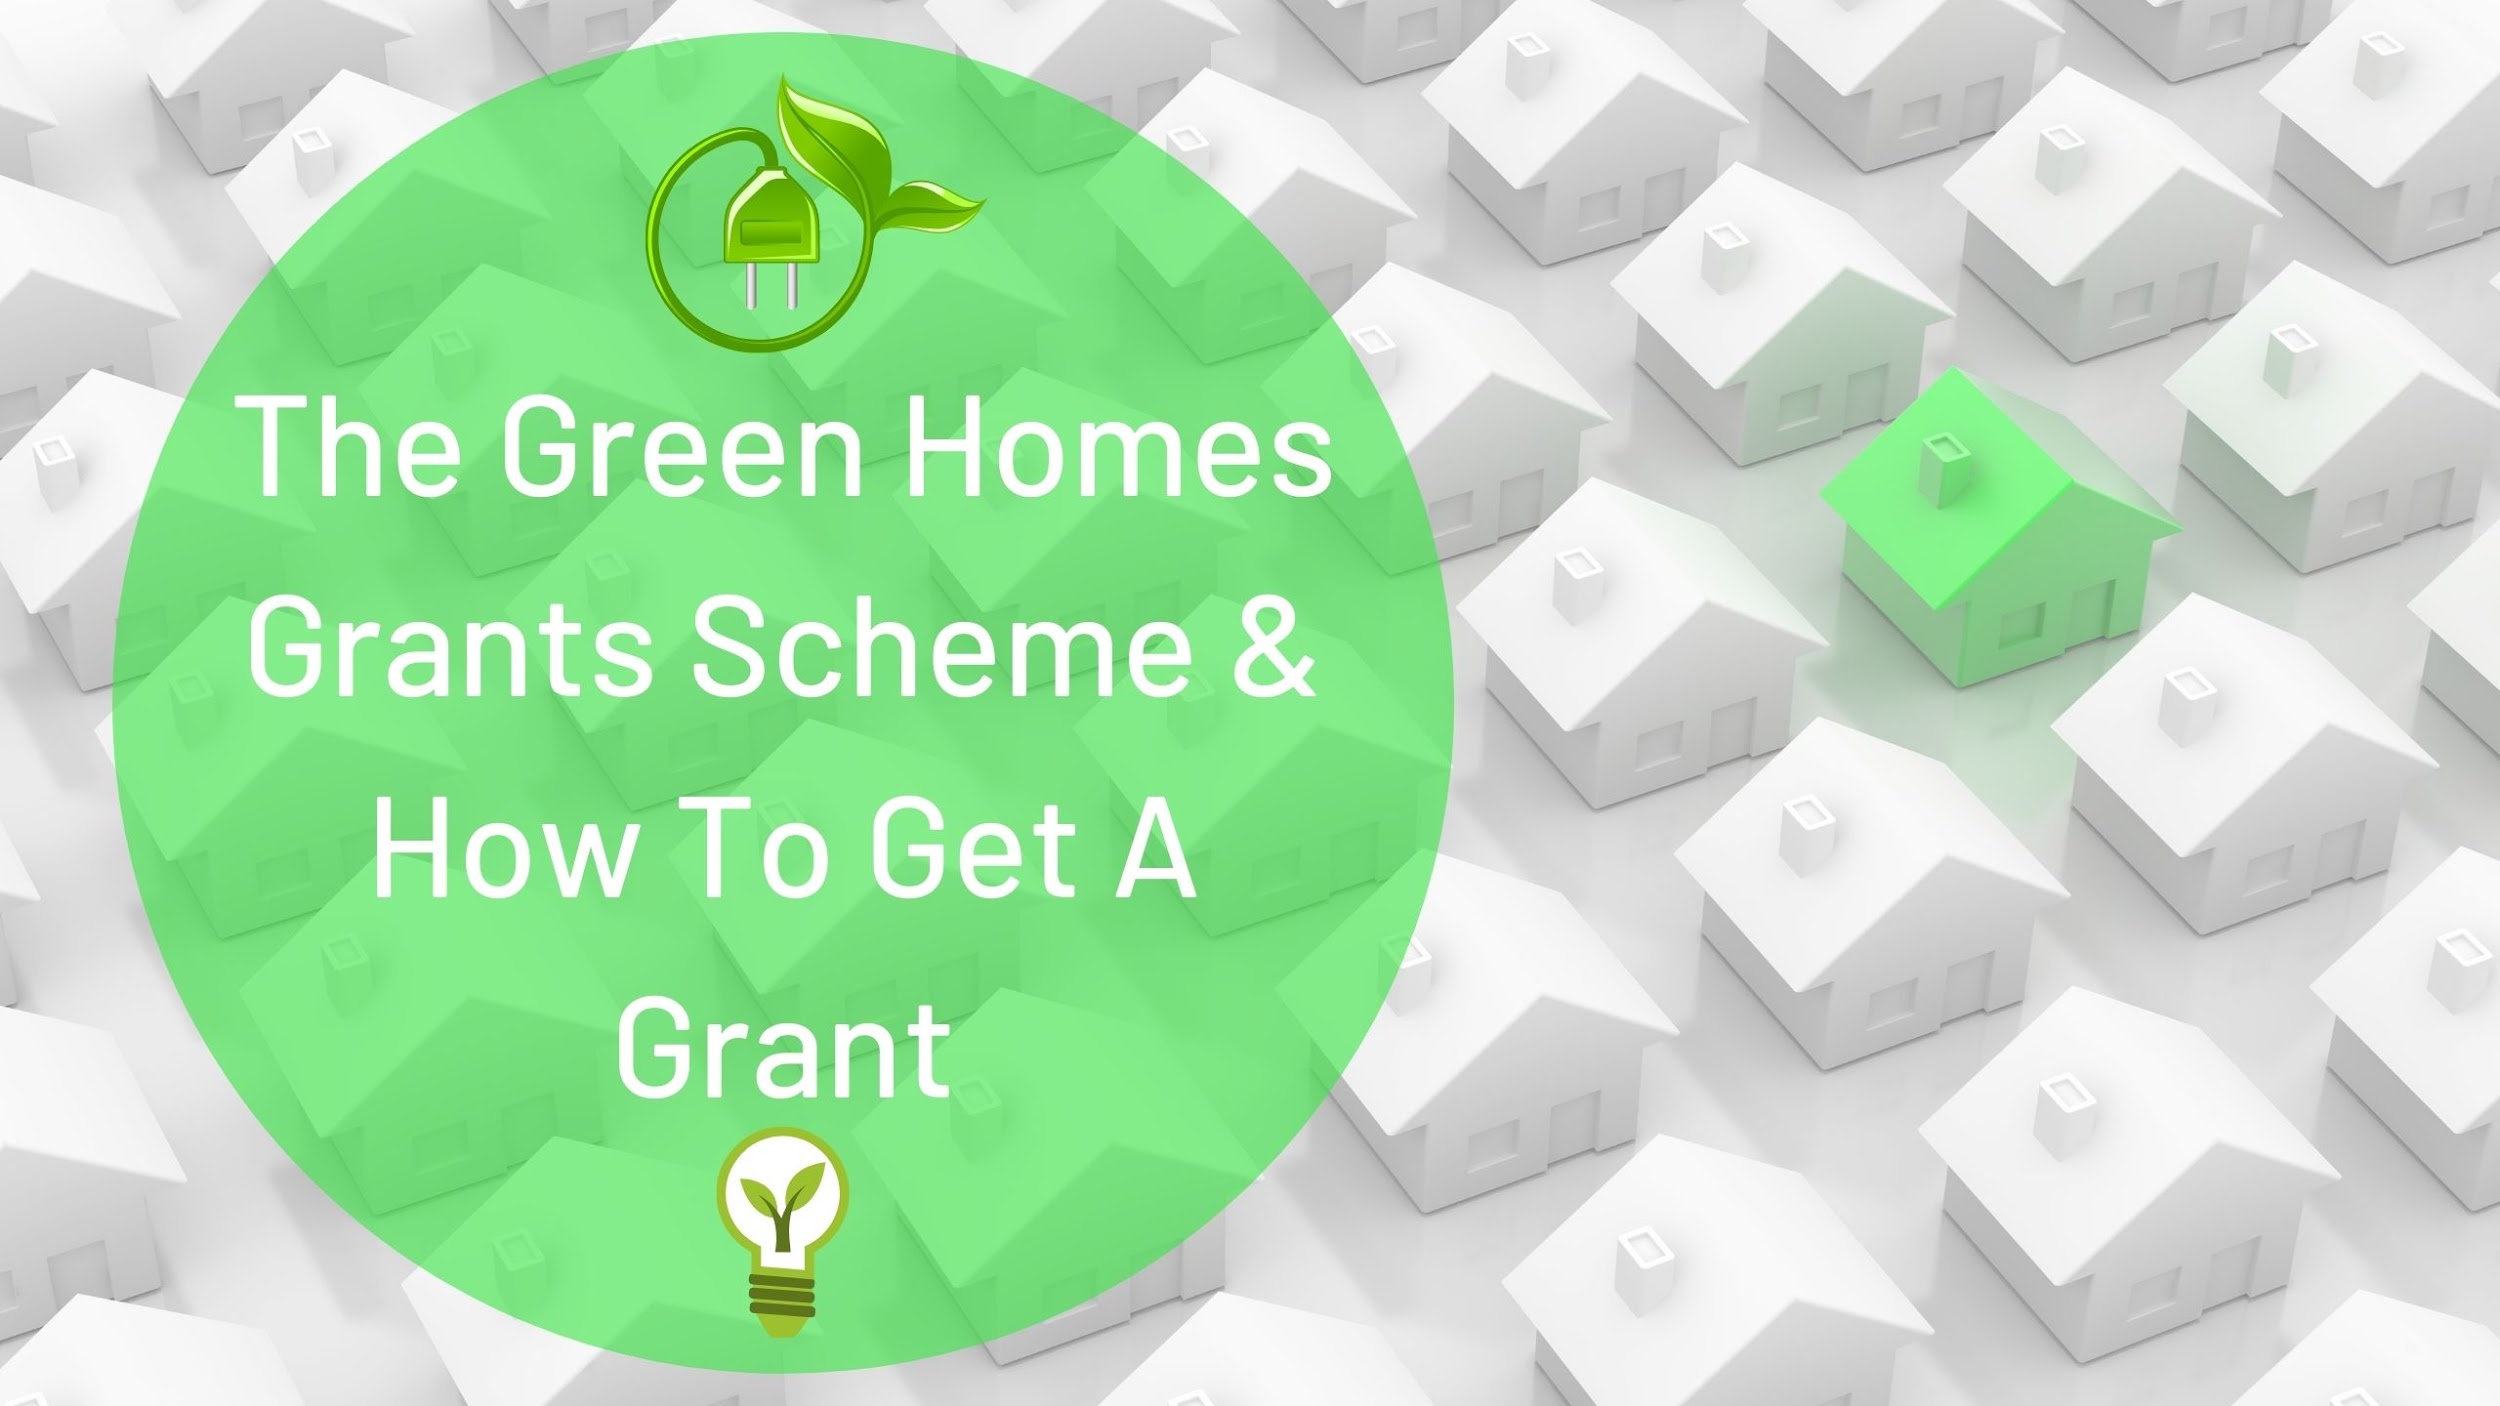 The Green Homes Grants Scheme & How To Get a grant